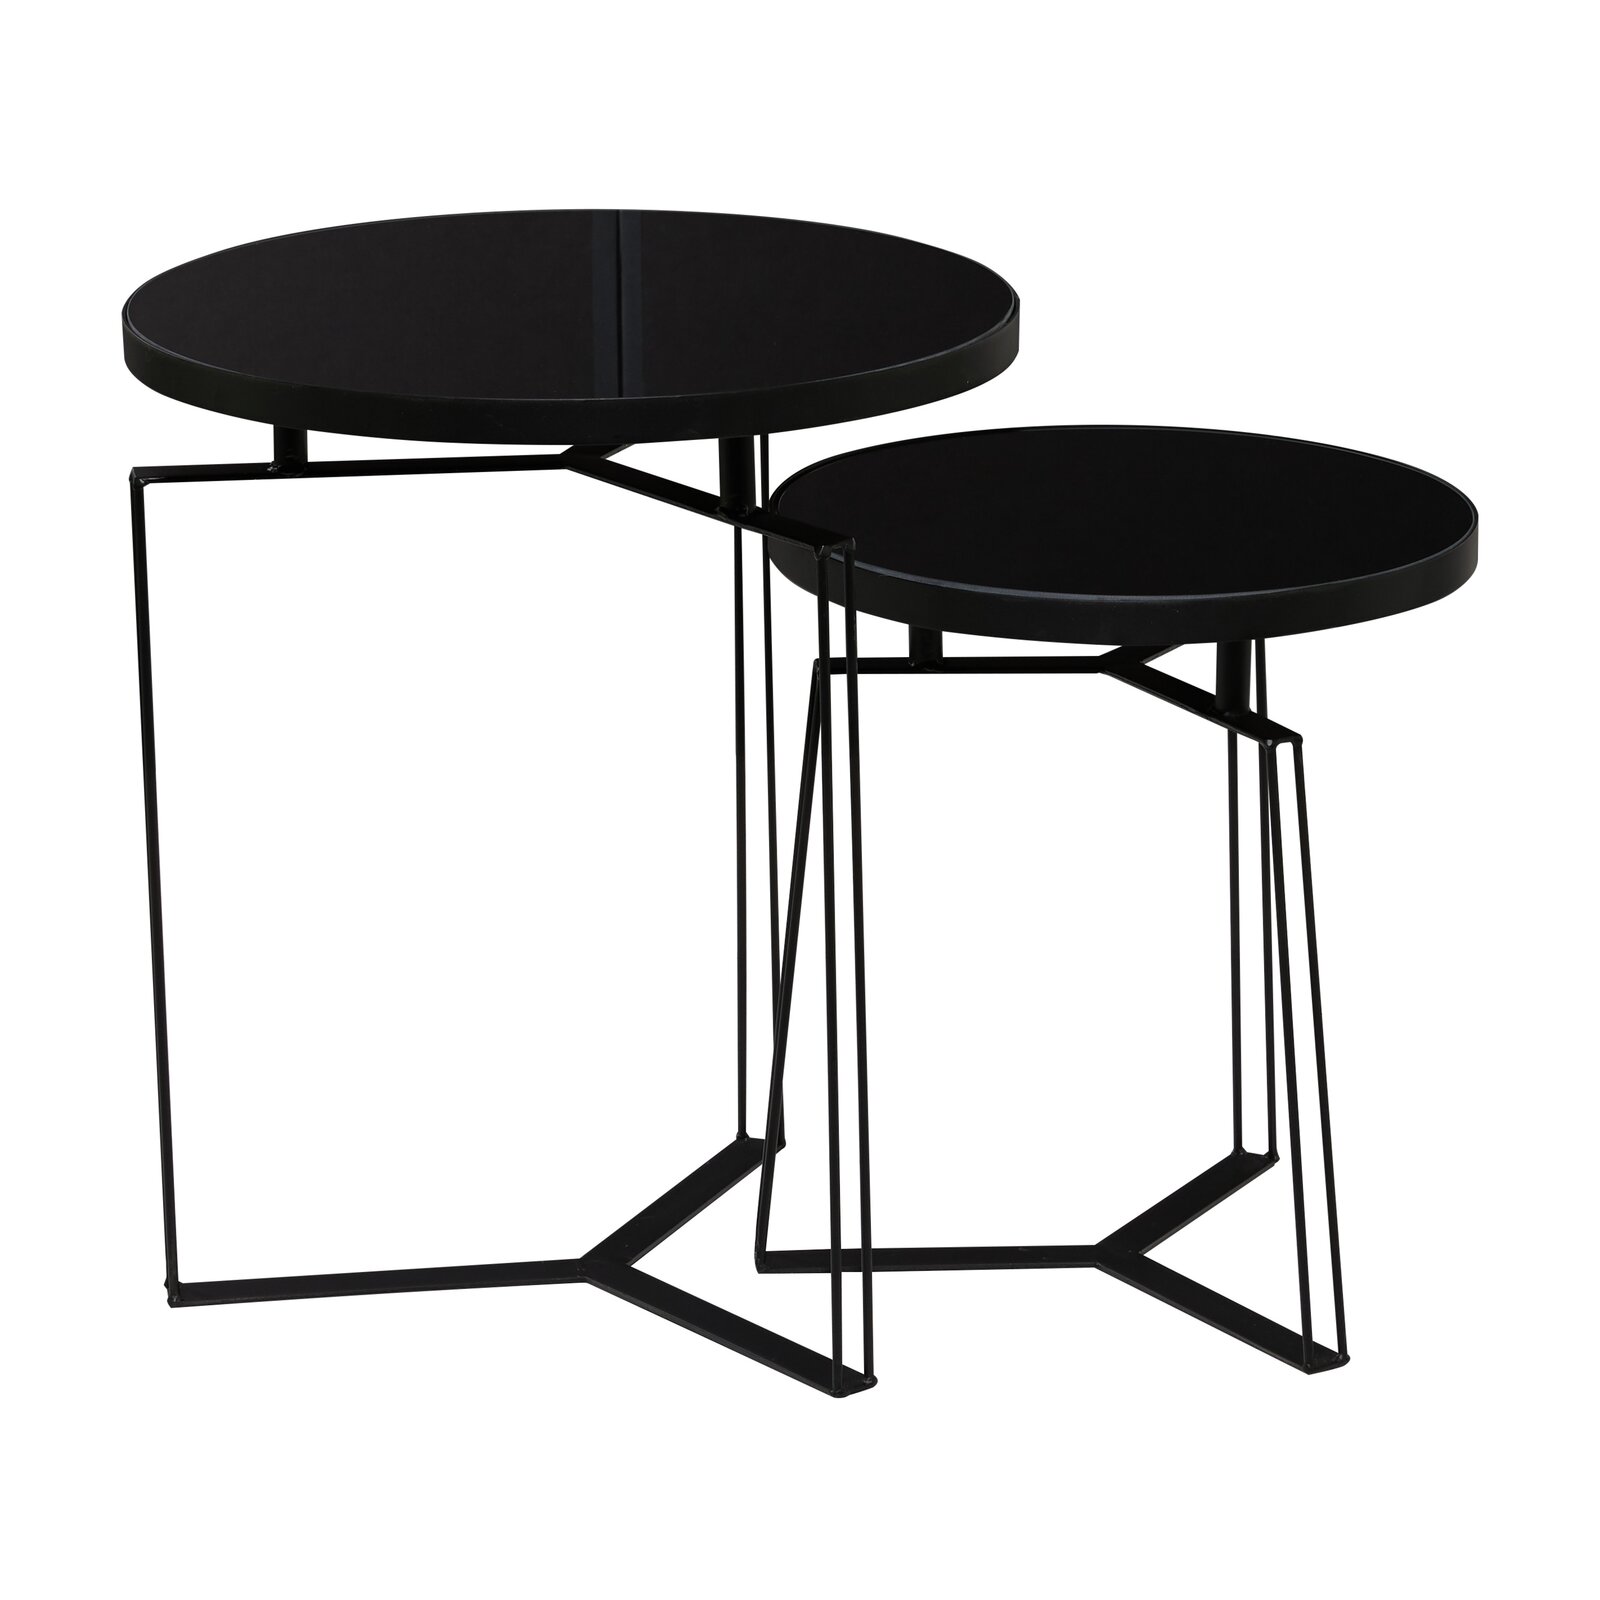 Cleorand Glass Top Frame Nesting Tables, Base Color: Black, Small Table:  19'' H x 16'' W x 16'' D